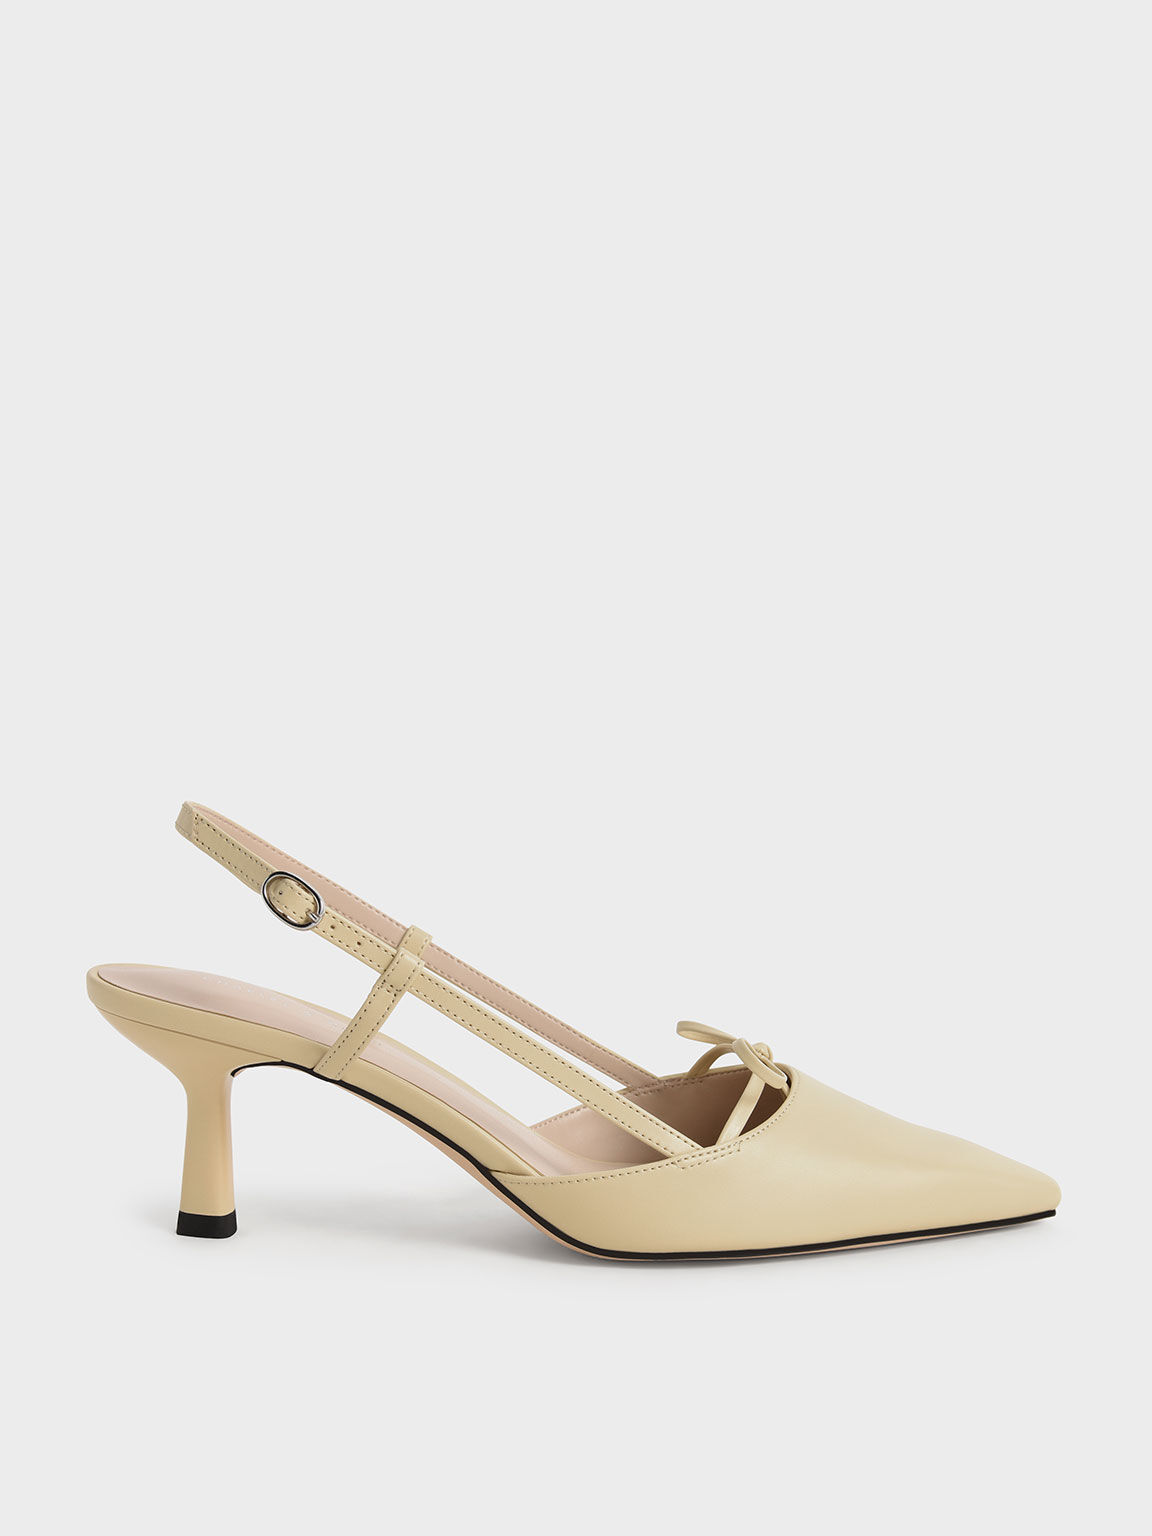 Charles & Keith Bead-embellished Leather Platform Sandals in Natural | Lyst